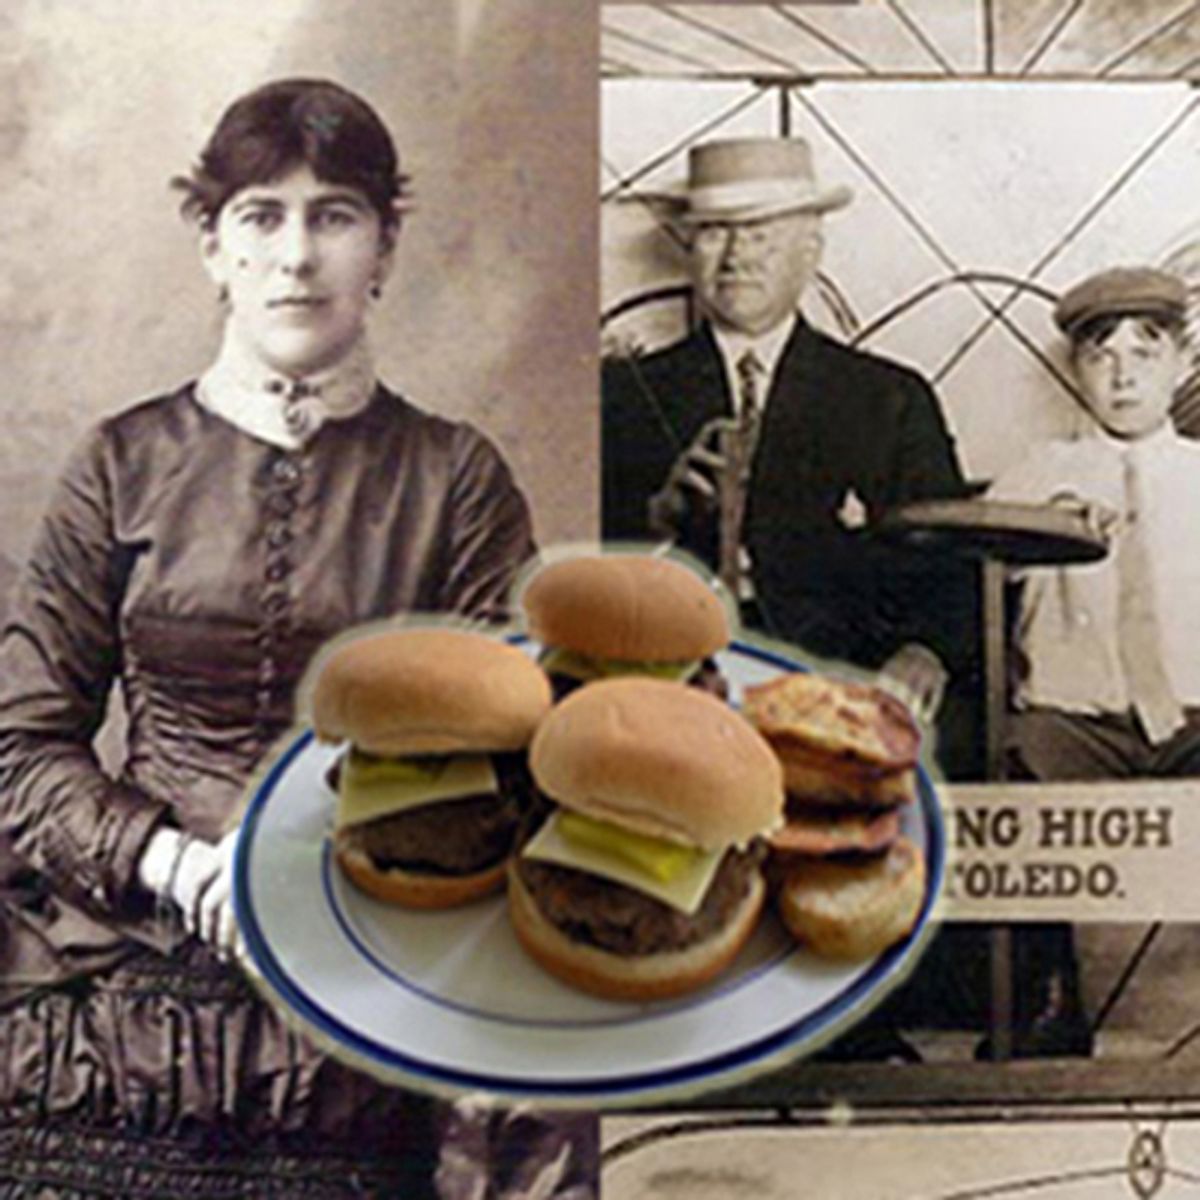 A passion for burgers is her heritage.